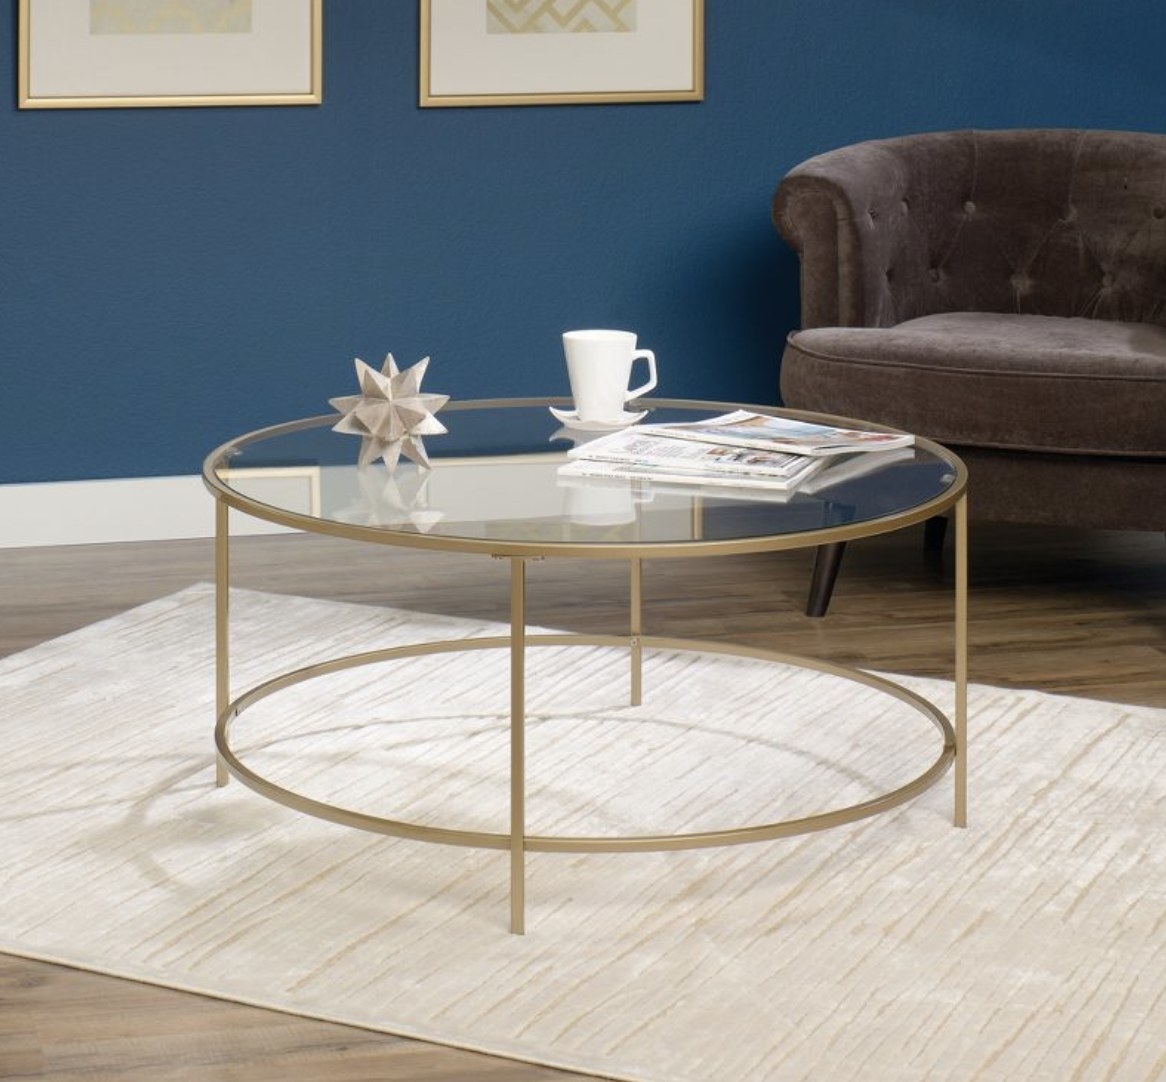 Glass coffe table with gold rim